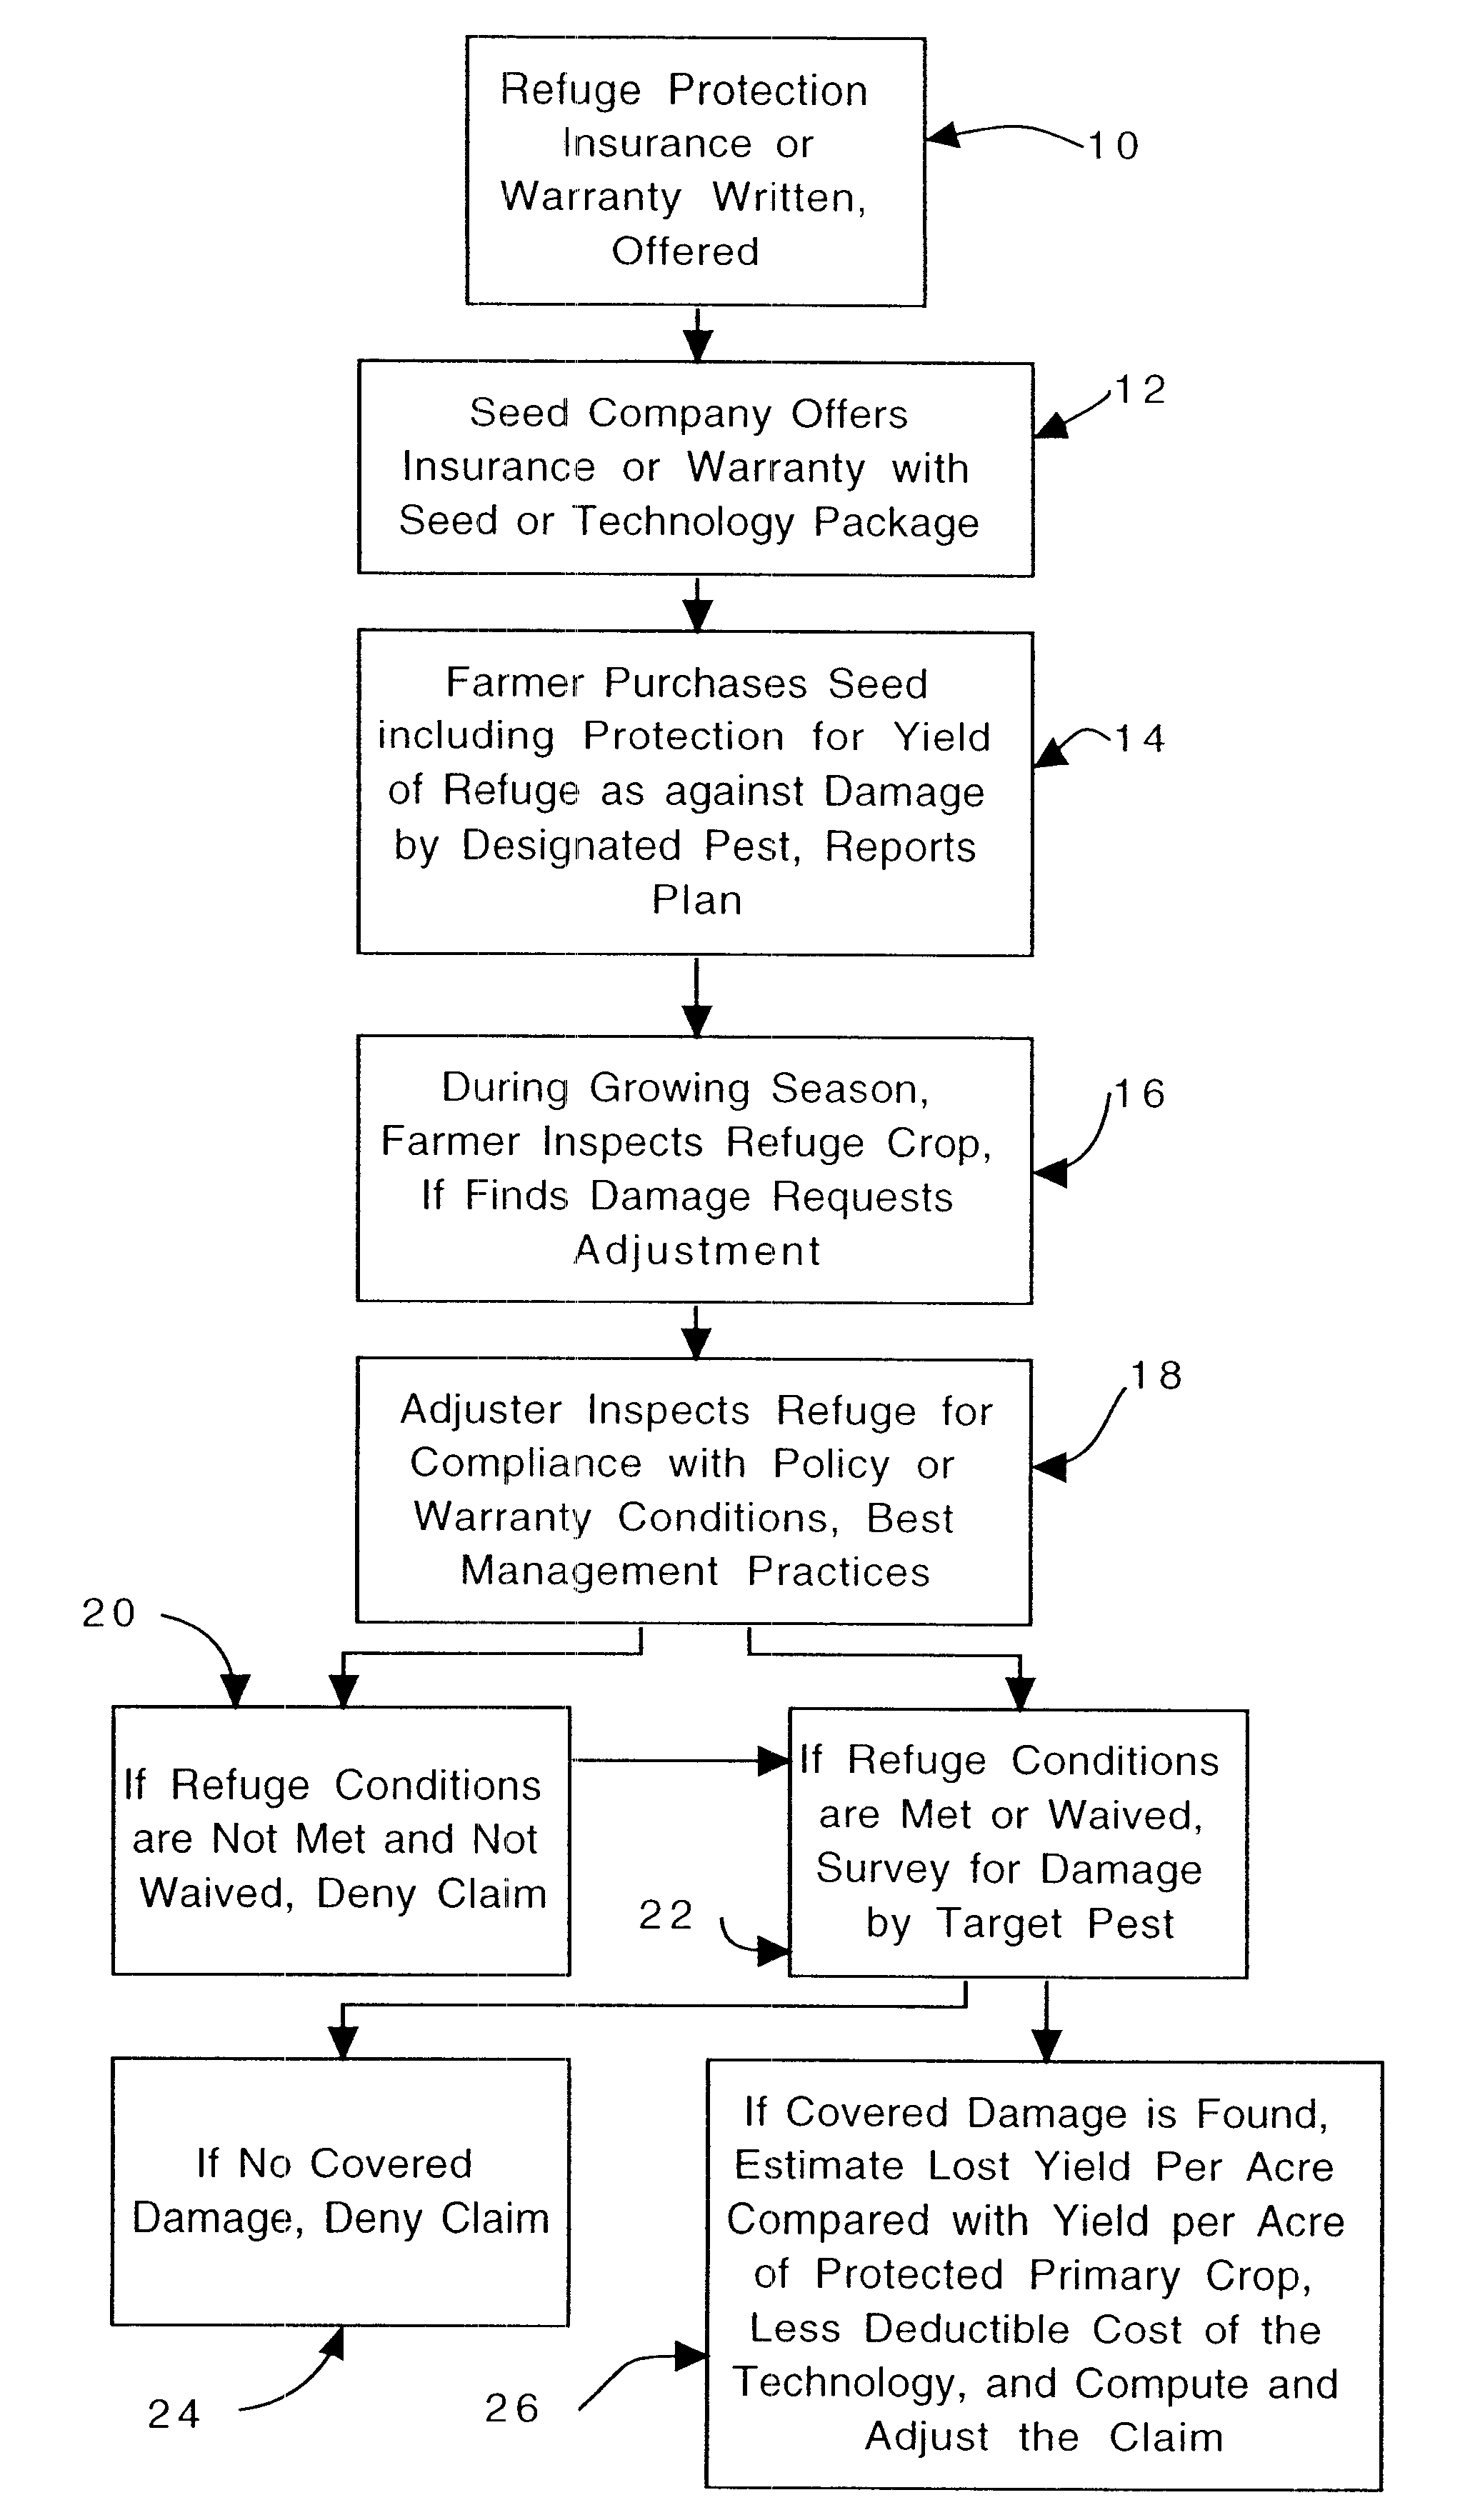 Method for delaying the development in pest species of resistance to control techniques, using insurance to encourage correct uses of refuges